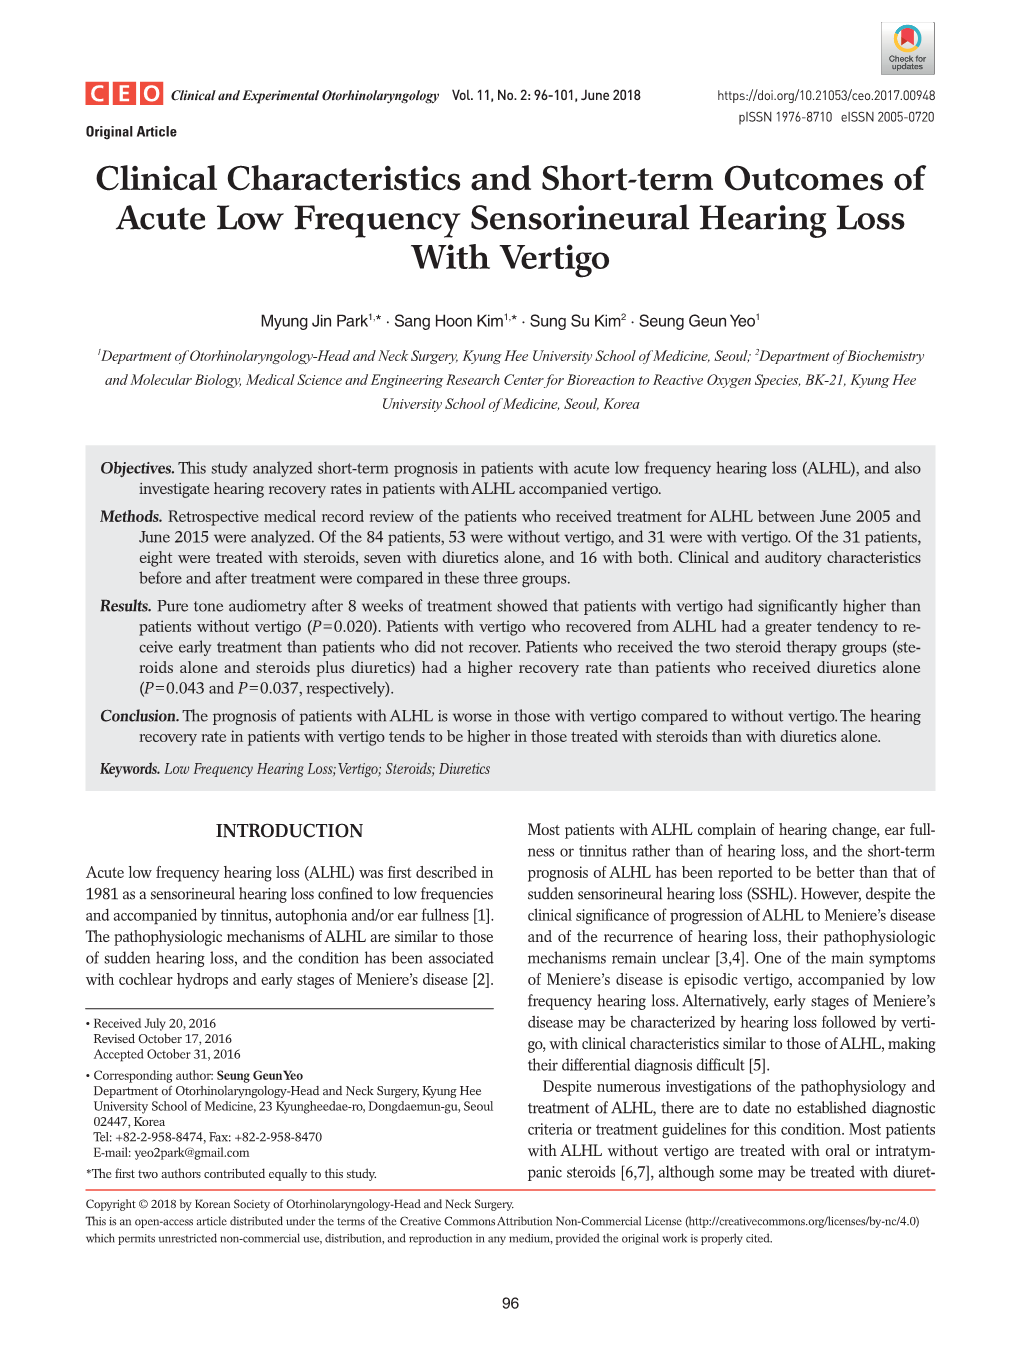 Clinical Characteristics and Short-Term Outcomes of Acute Low Frequency Sensorineural Hearing Loss with Vertigo